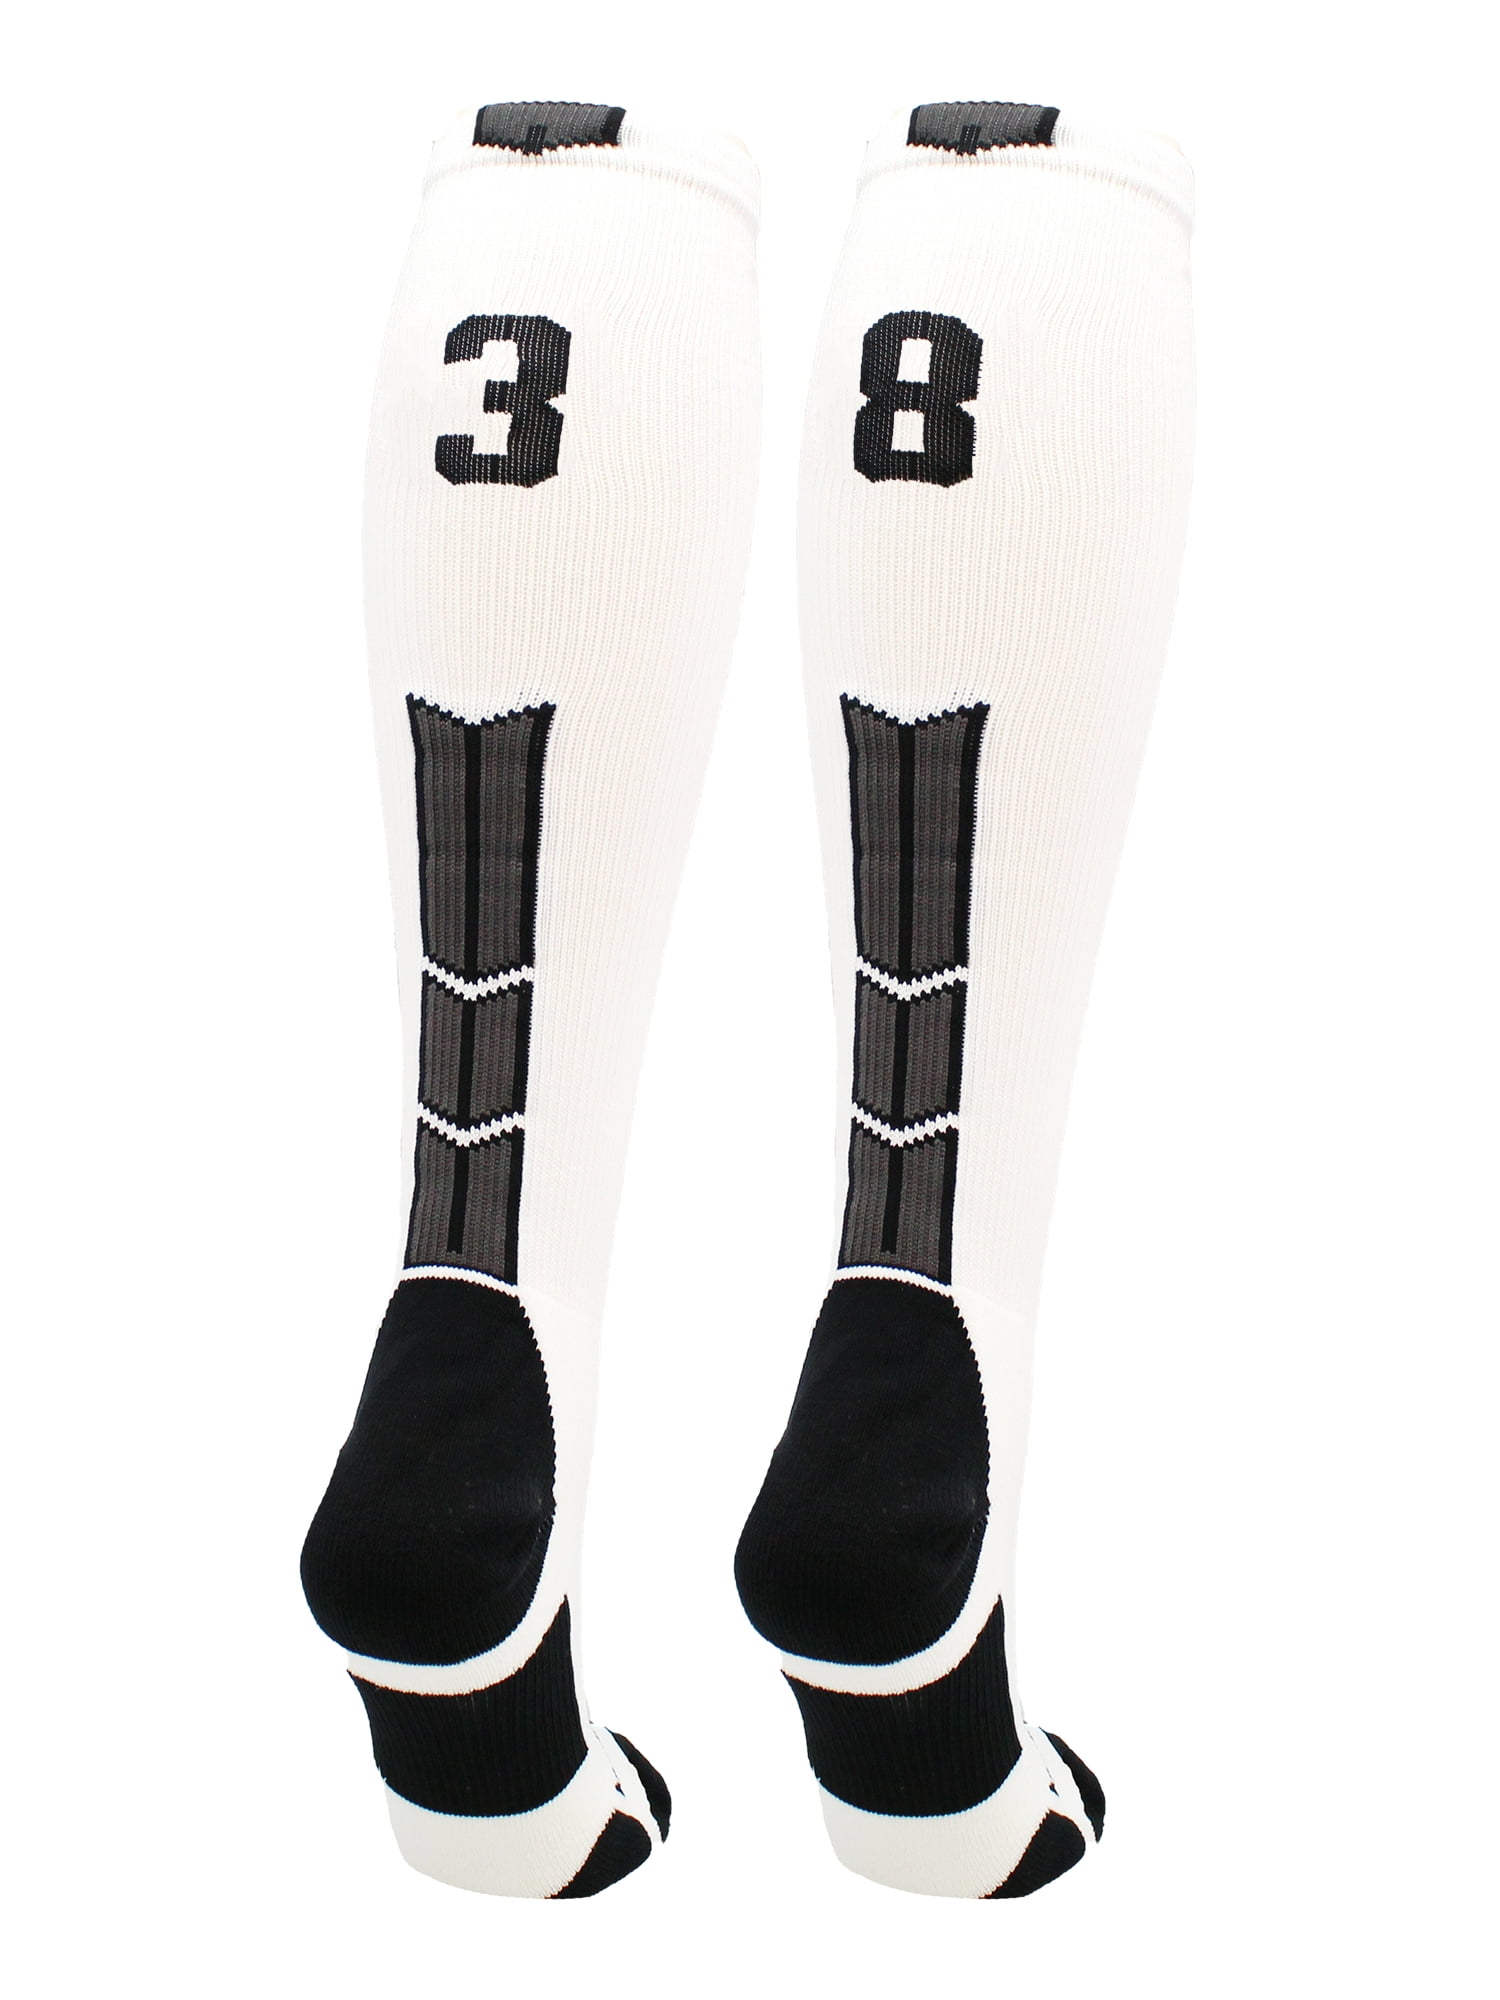 MadSportsStuff Player Id Black/White Over the Calf Number Socks 